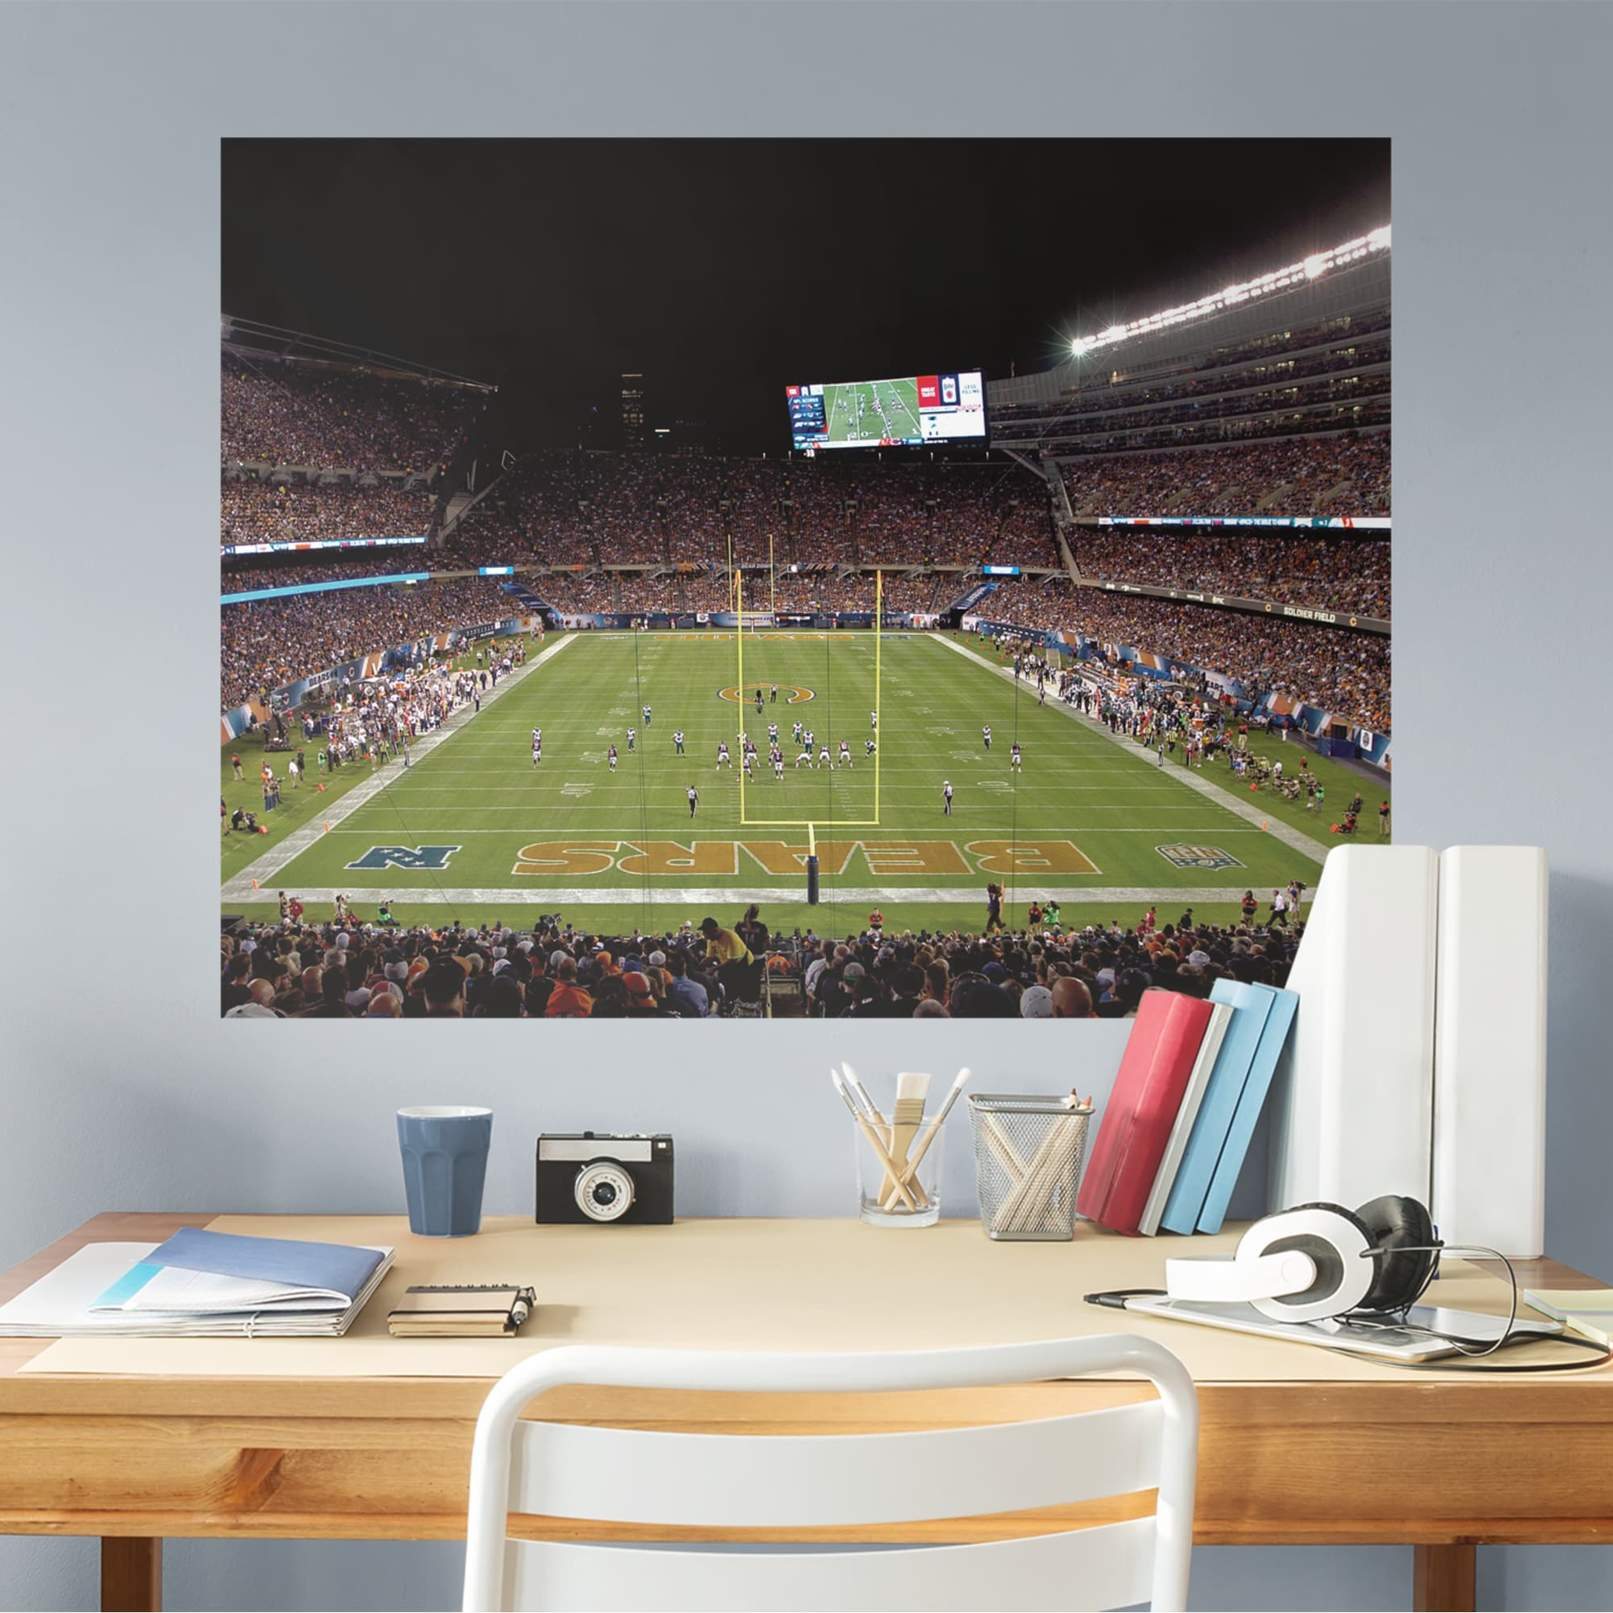 https://fathead.com/collections/nfl-murals/products/12-21858